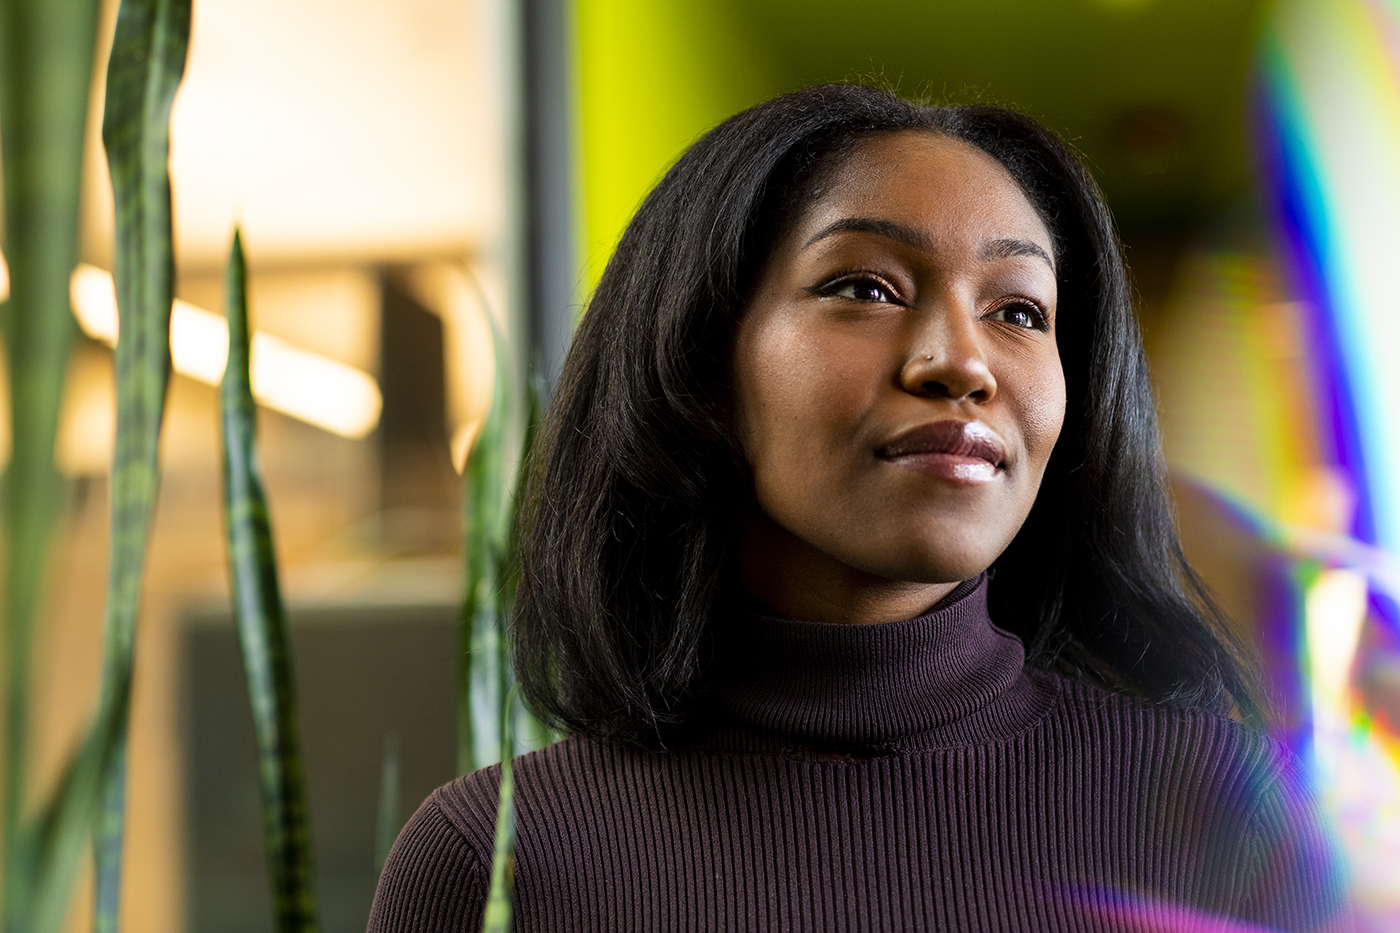 Aniyah Smith, an MBA graduate, poses for a portrait.